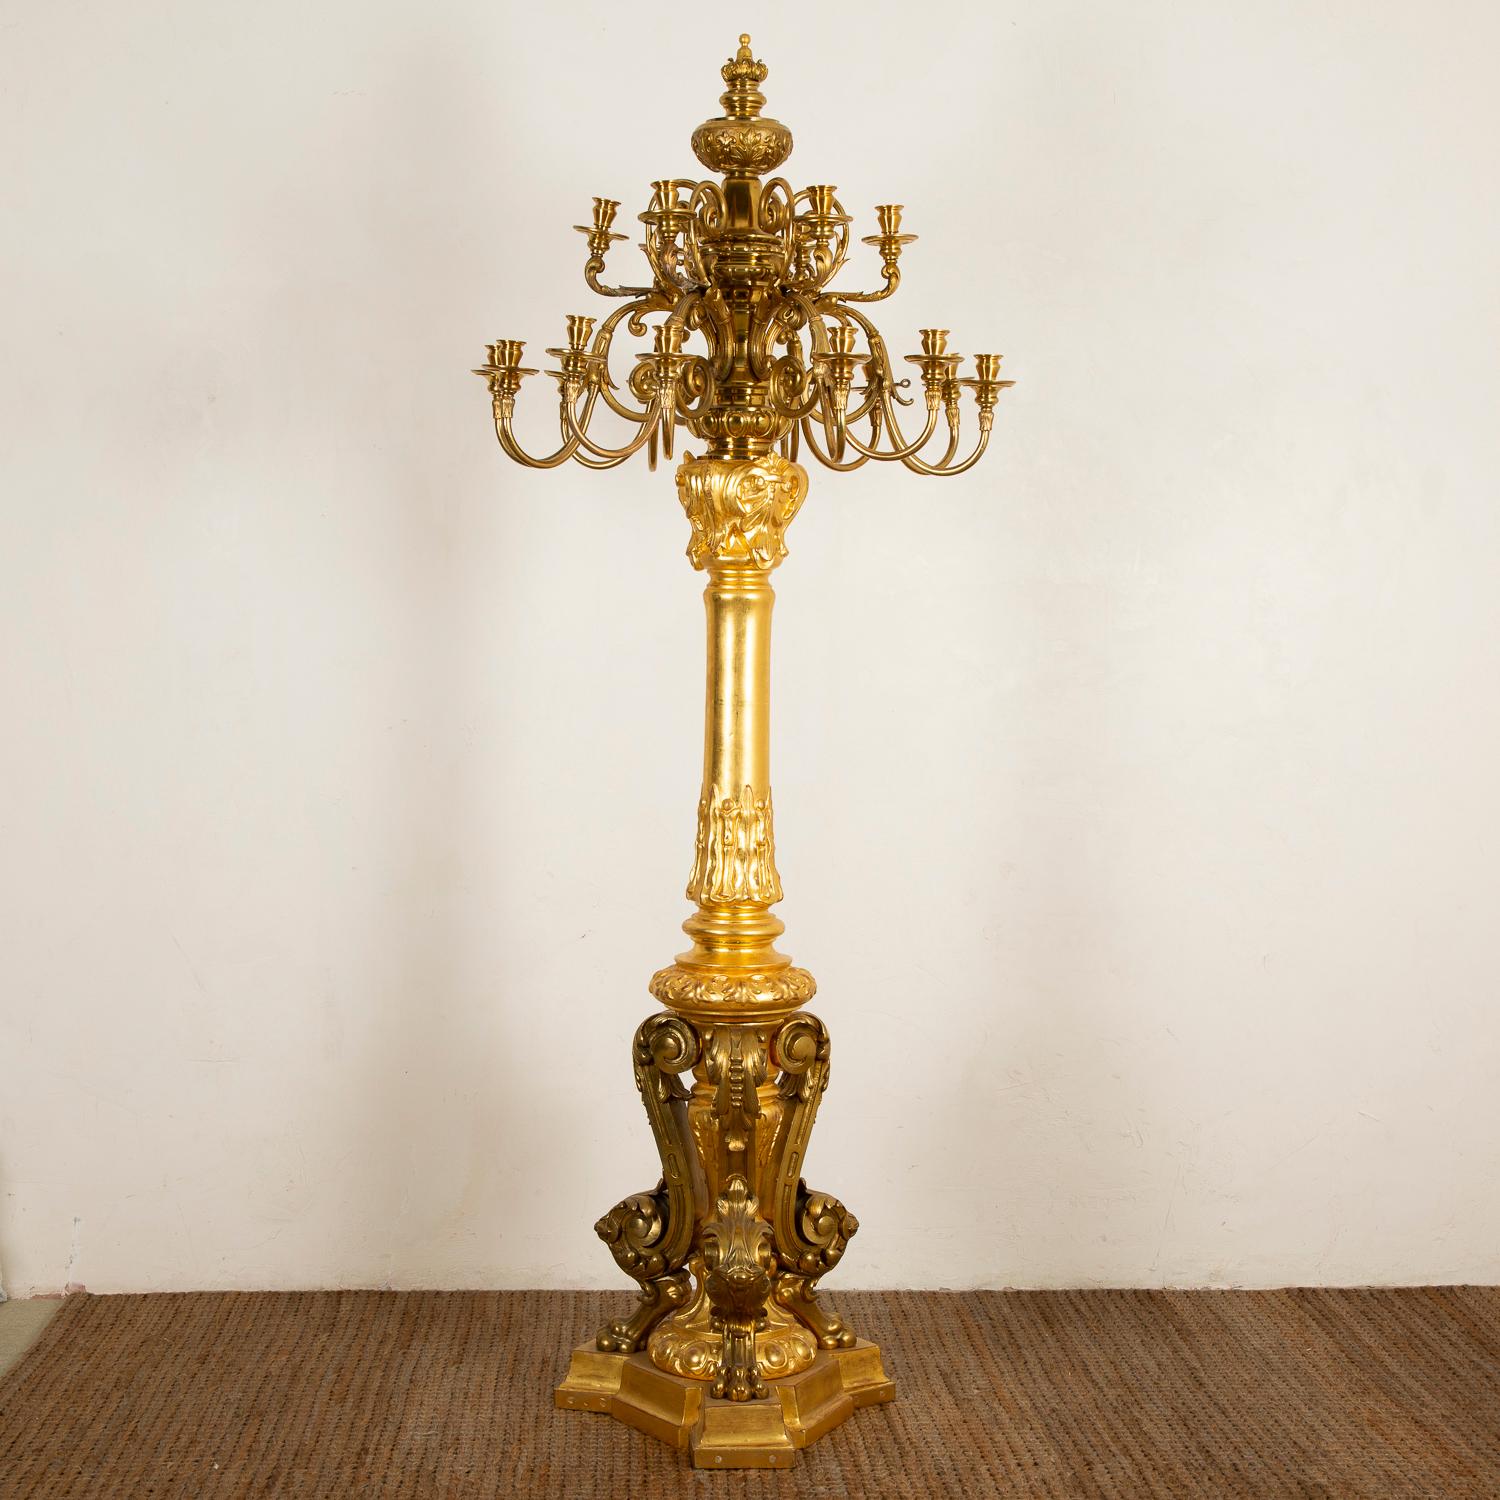 Large giltwood and gilt bronze candelabra in the Louis XVI style, Paris, circa 1870.

Each candelabra has 18 arms, on two tiers.

The candelabra can be wired for use with modern lights, the candle holders have been previously wired for